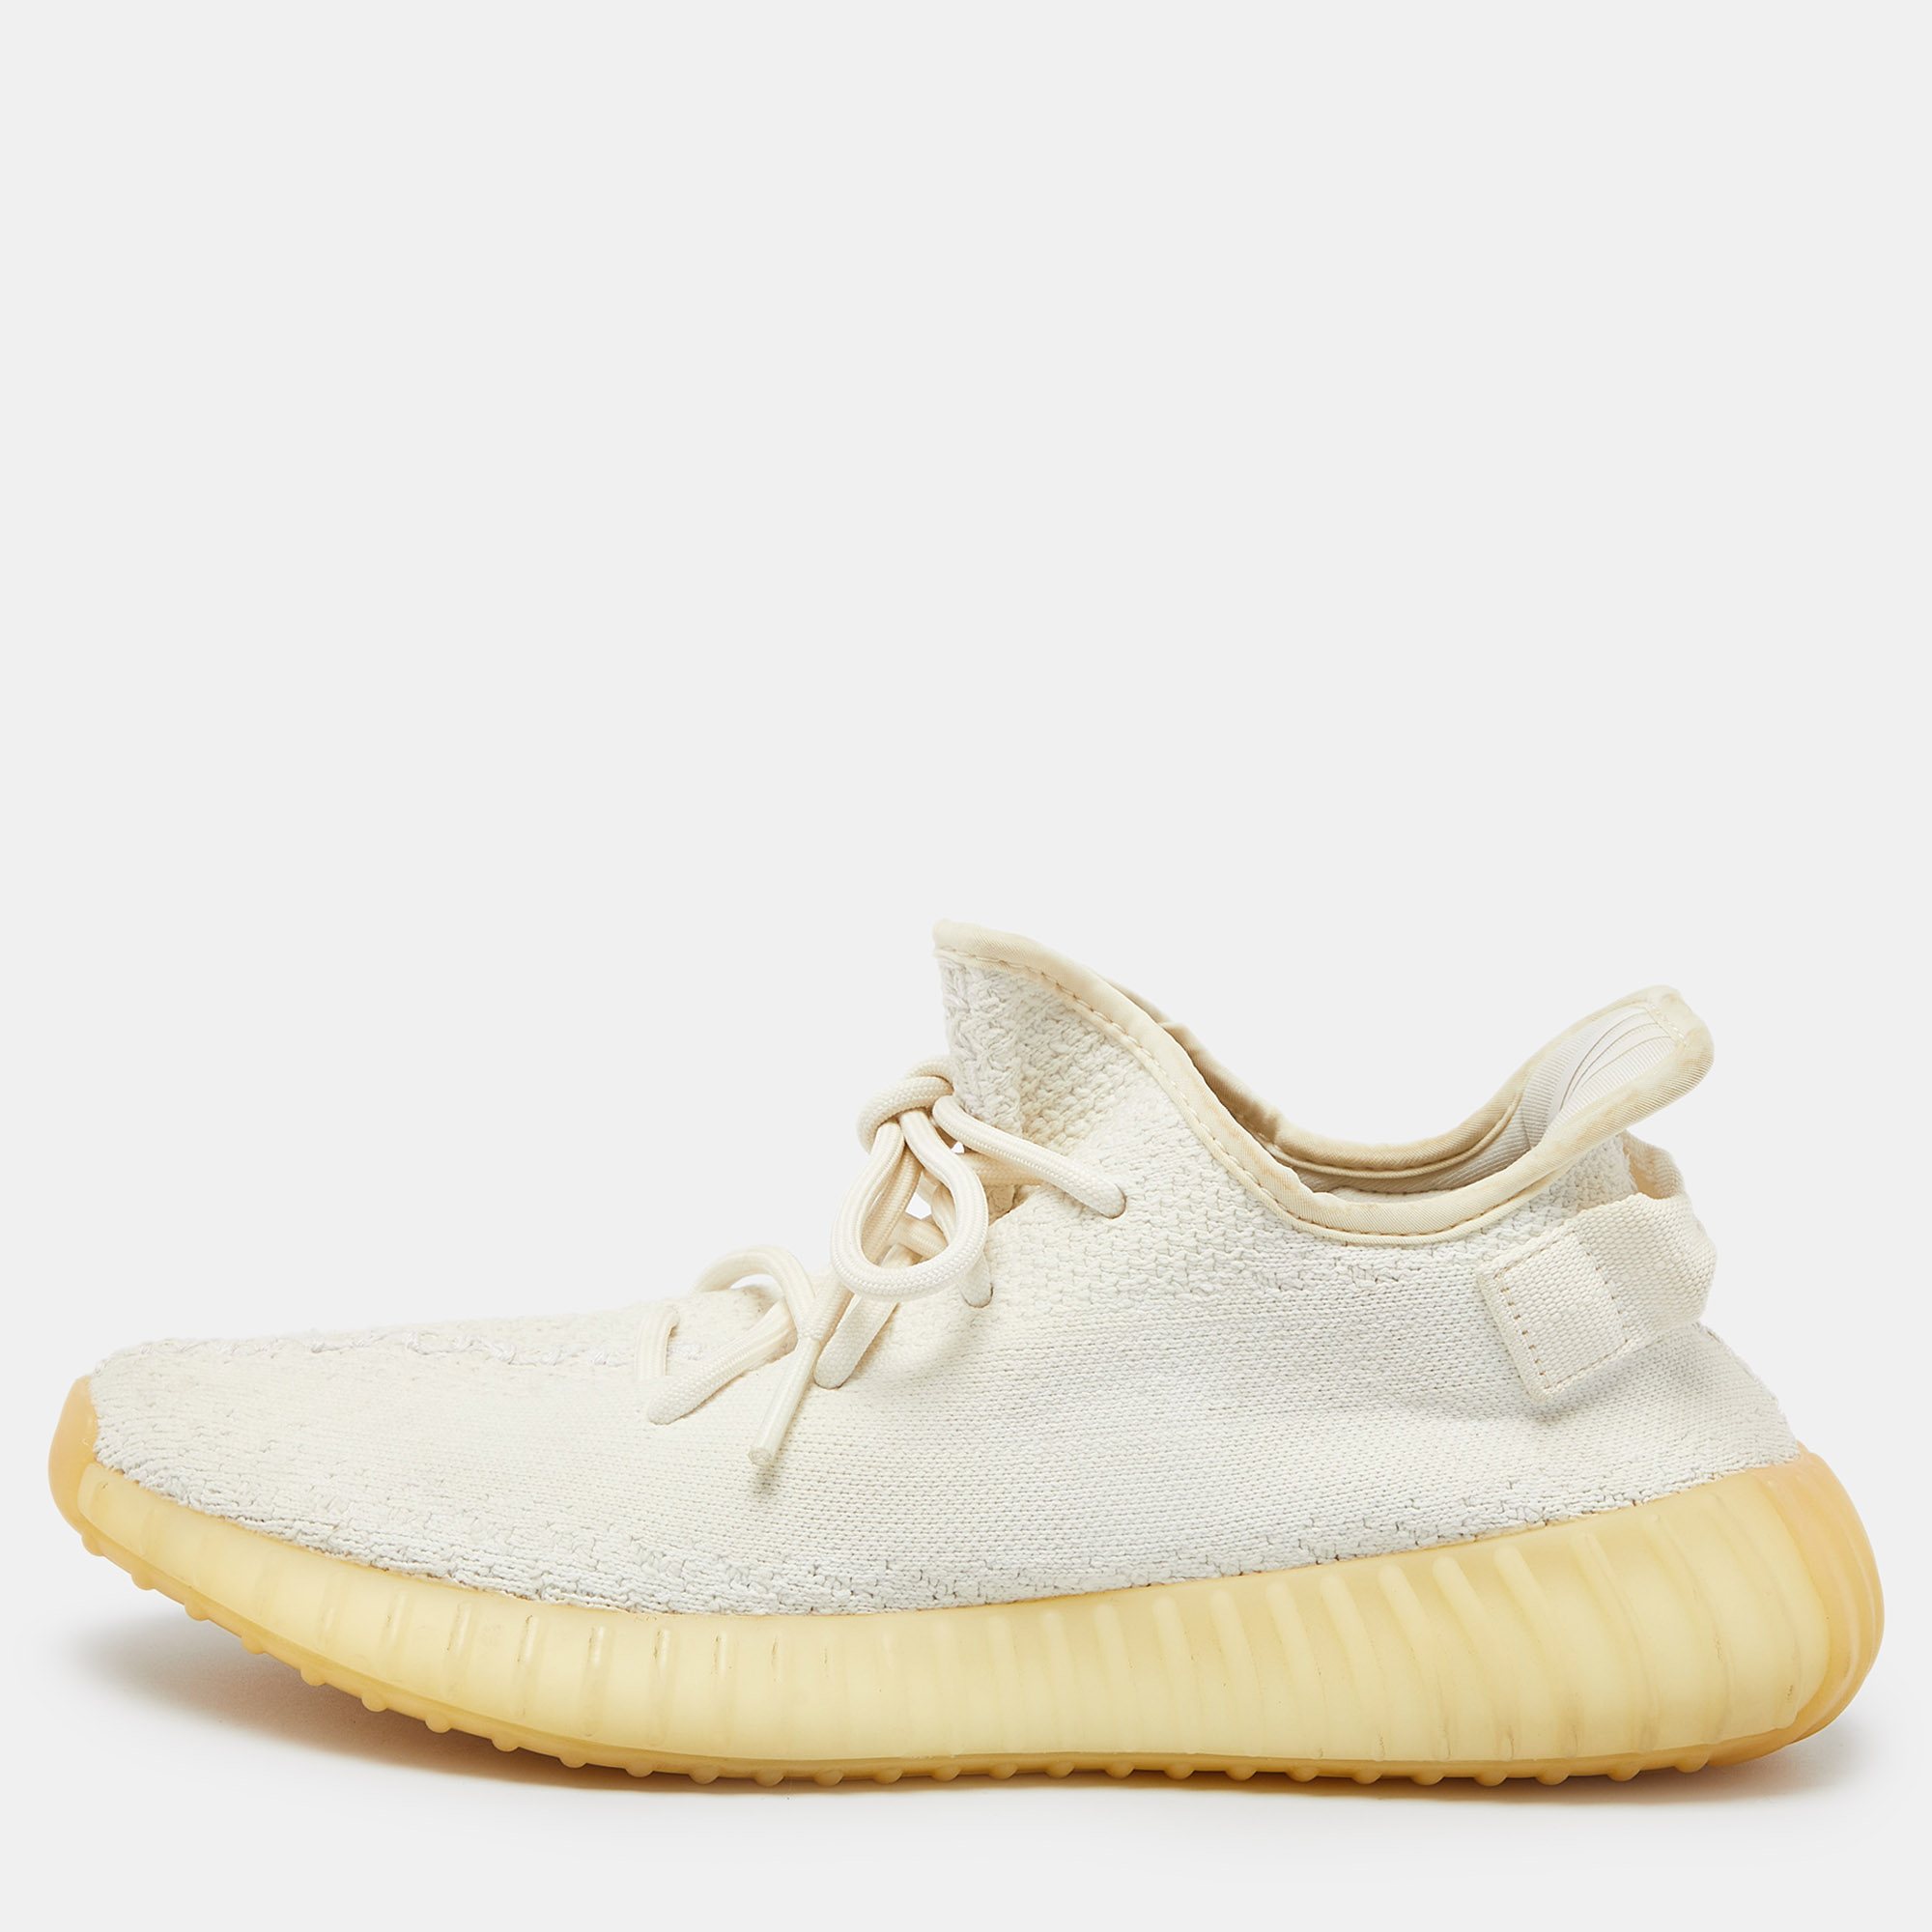 

Yeezy x Adidas Cream Knit Fabric Boost 350 V2 Cream Sneakers Size 42 2/3